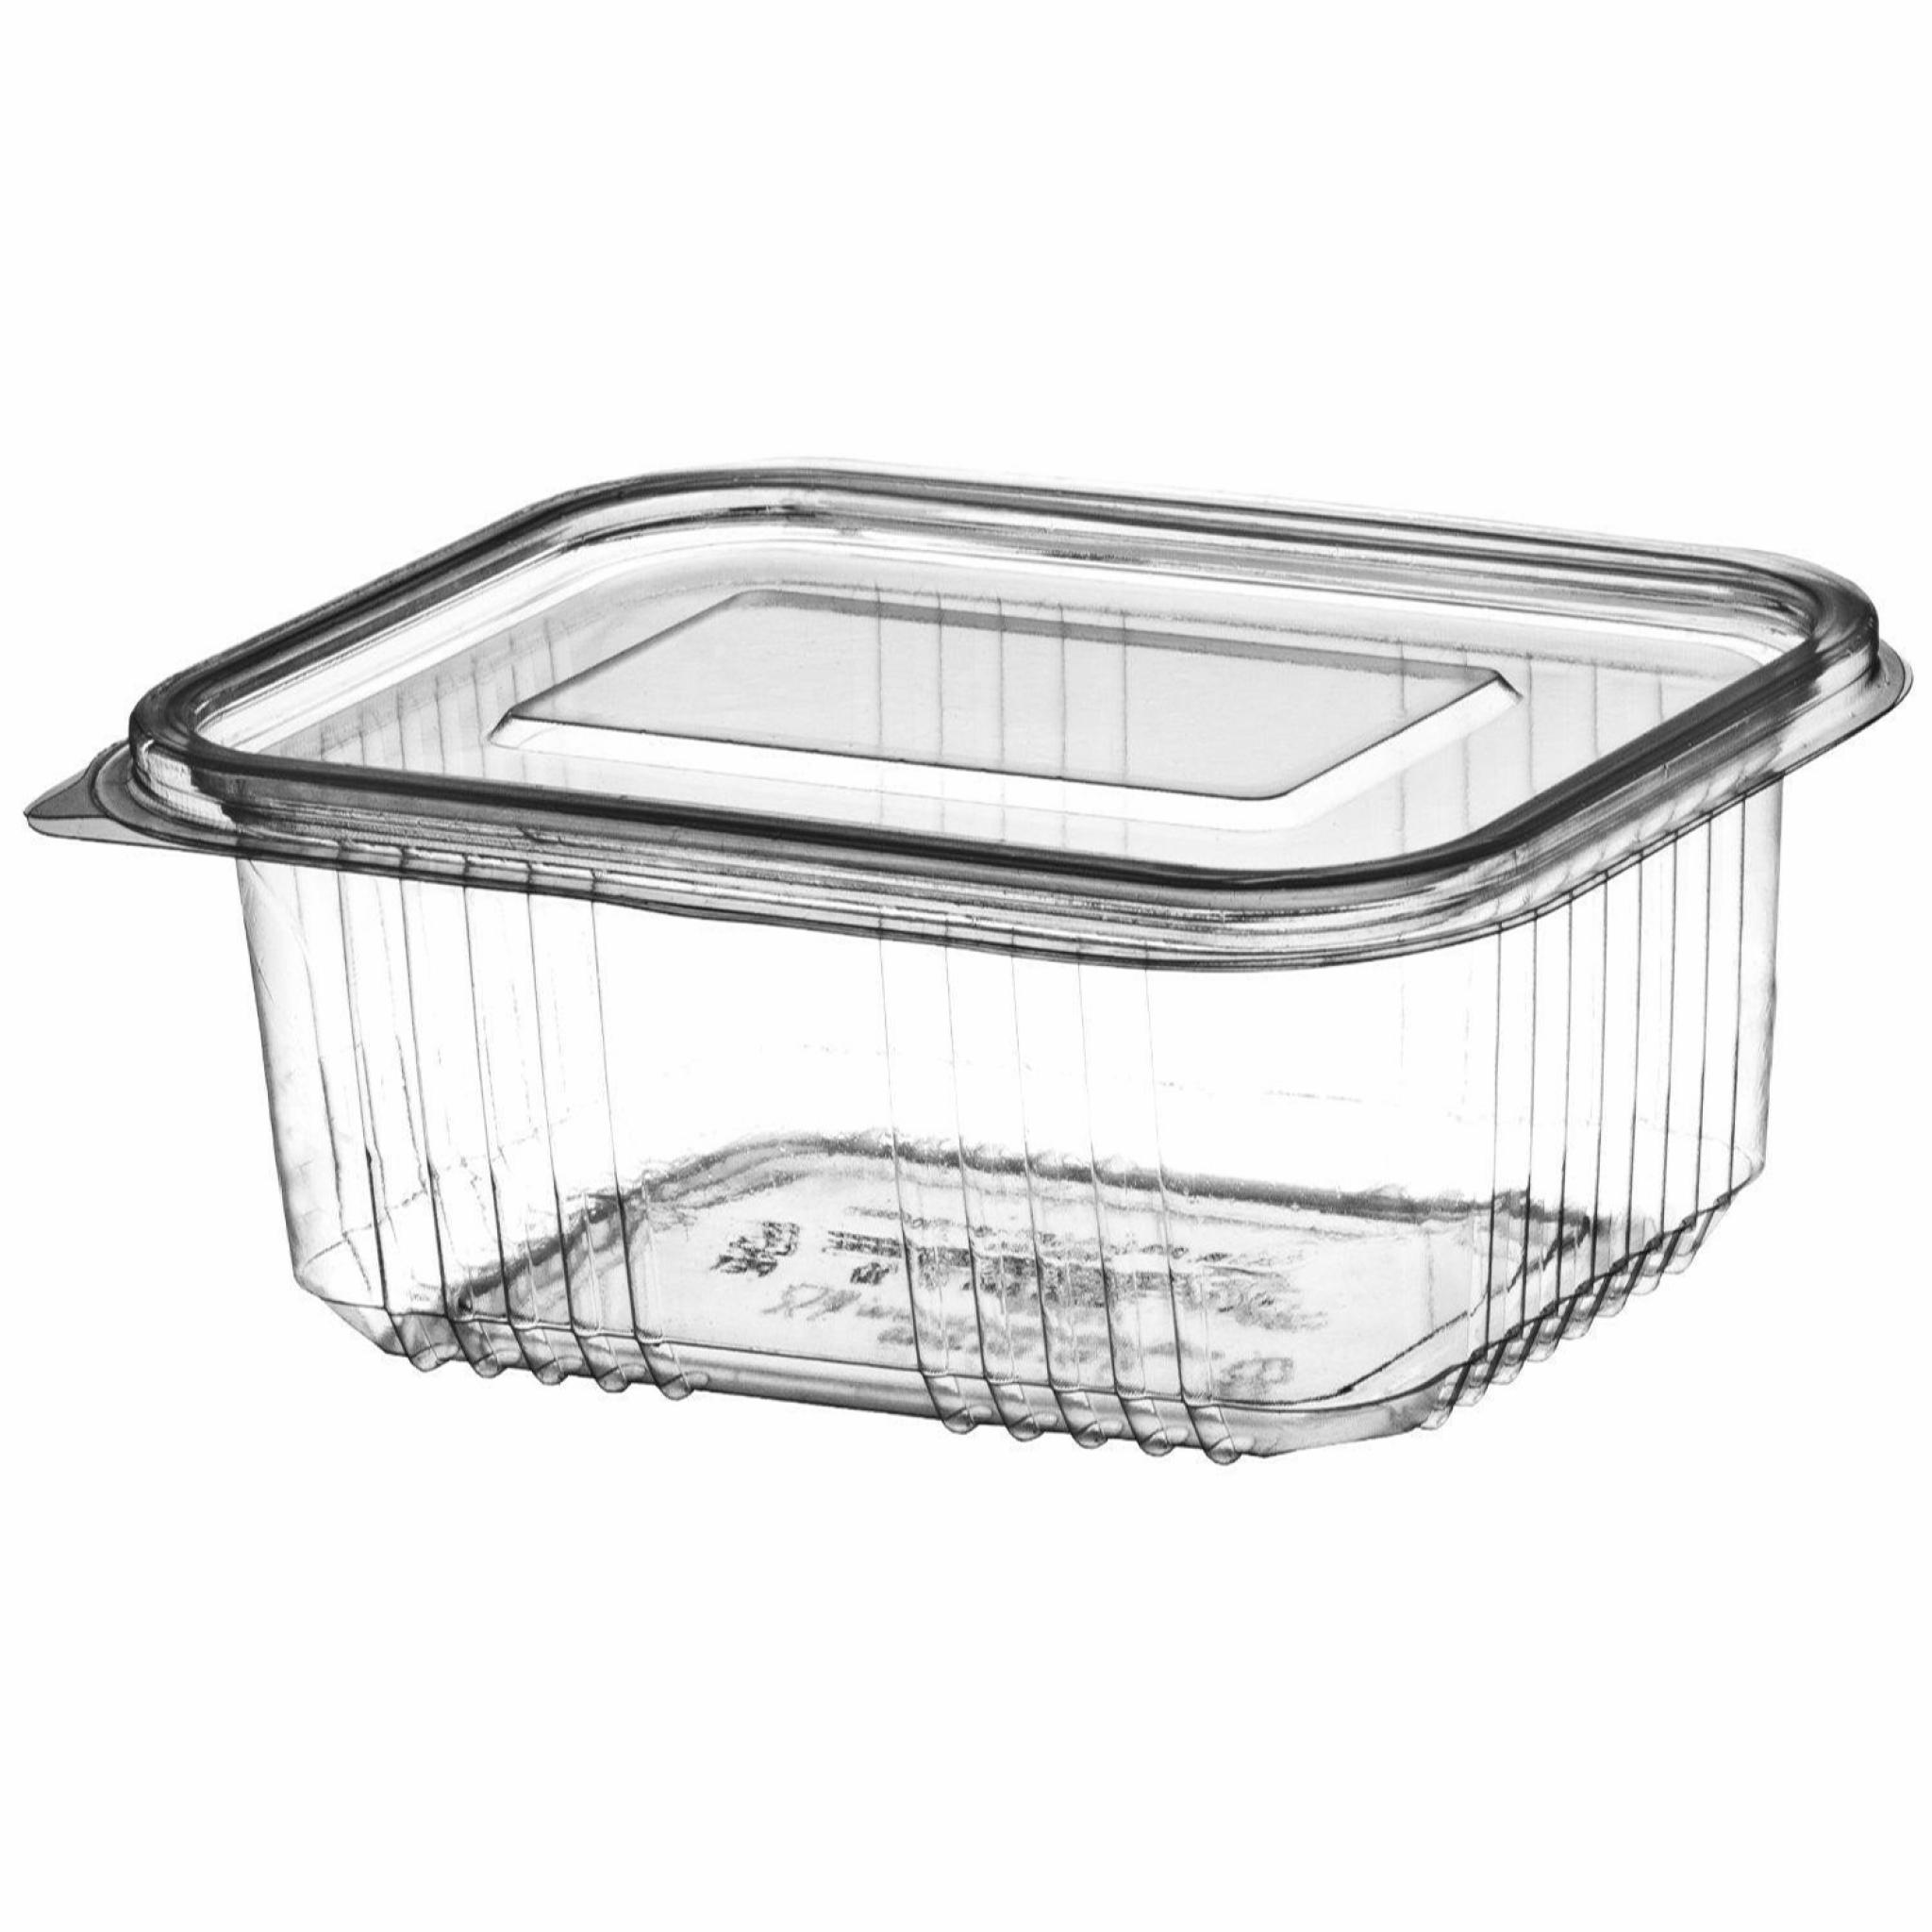 Pack of 3 Clear 1500cc Plastic Salad Bowl